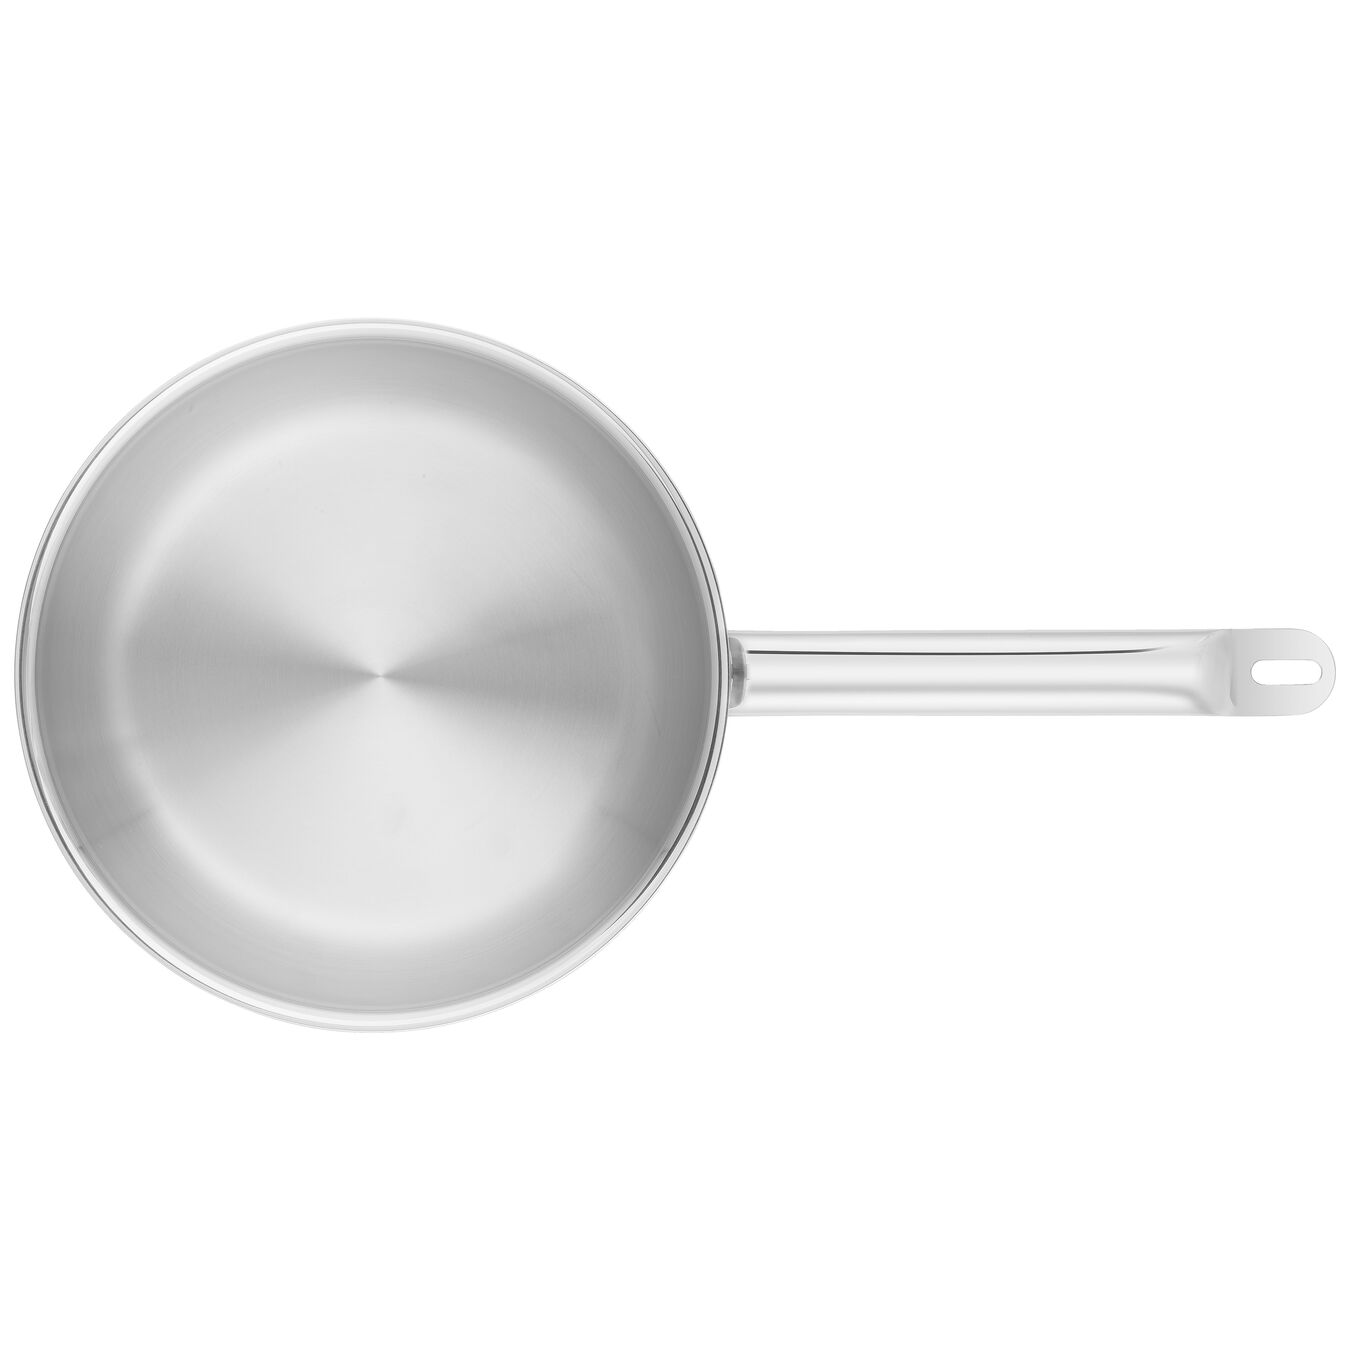 24 cm / 9.5 inch 18/10 Stainless Steel Frying pan,,large 5